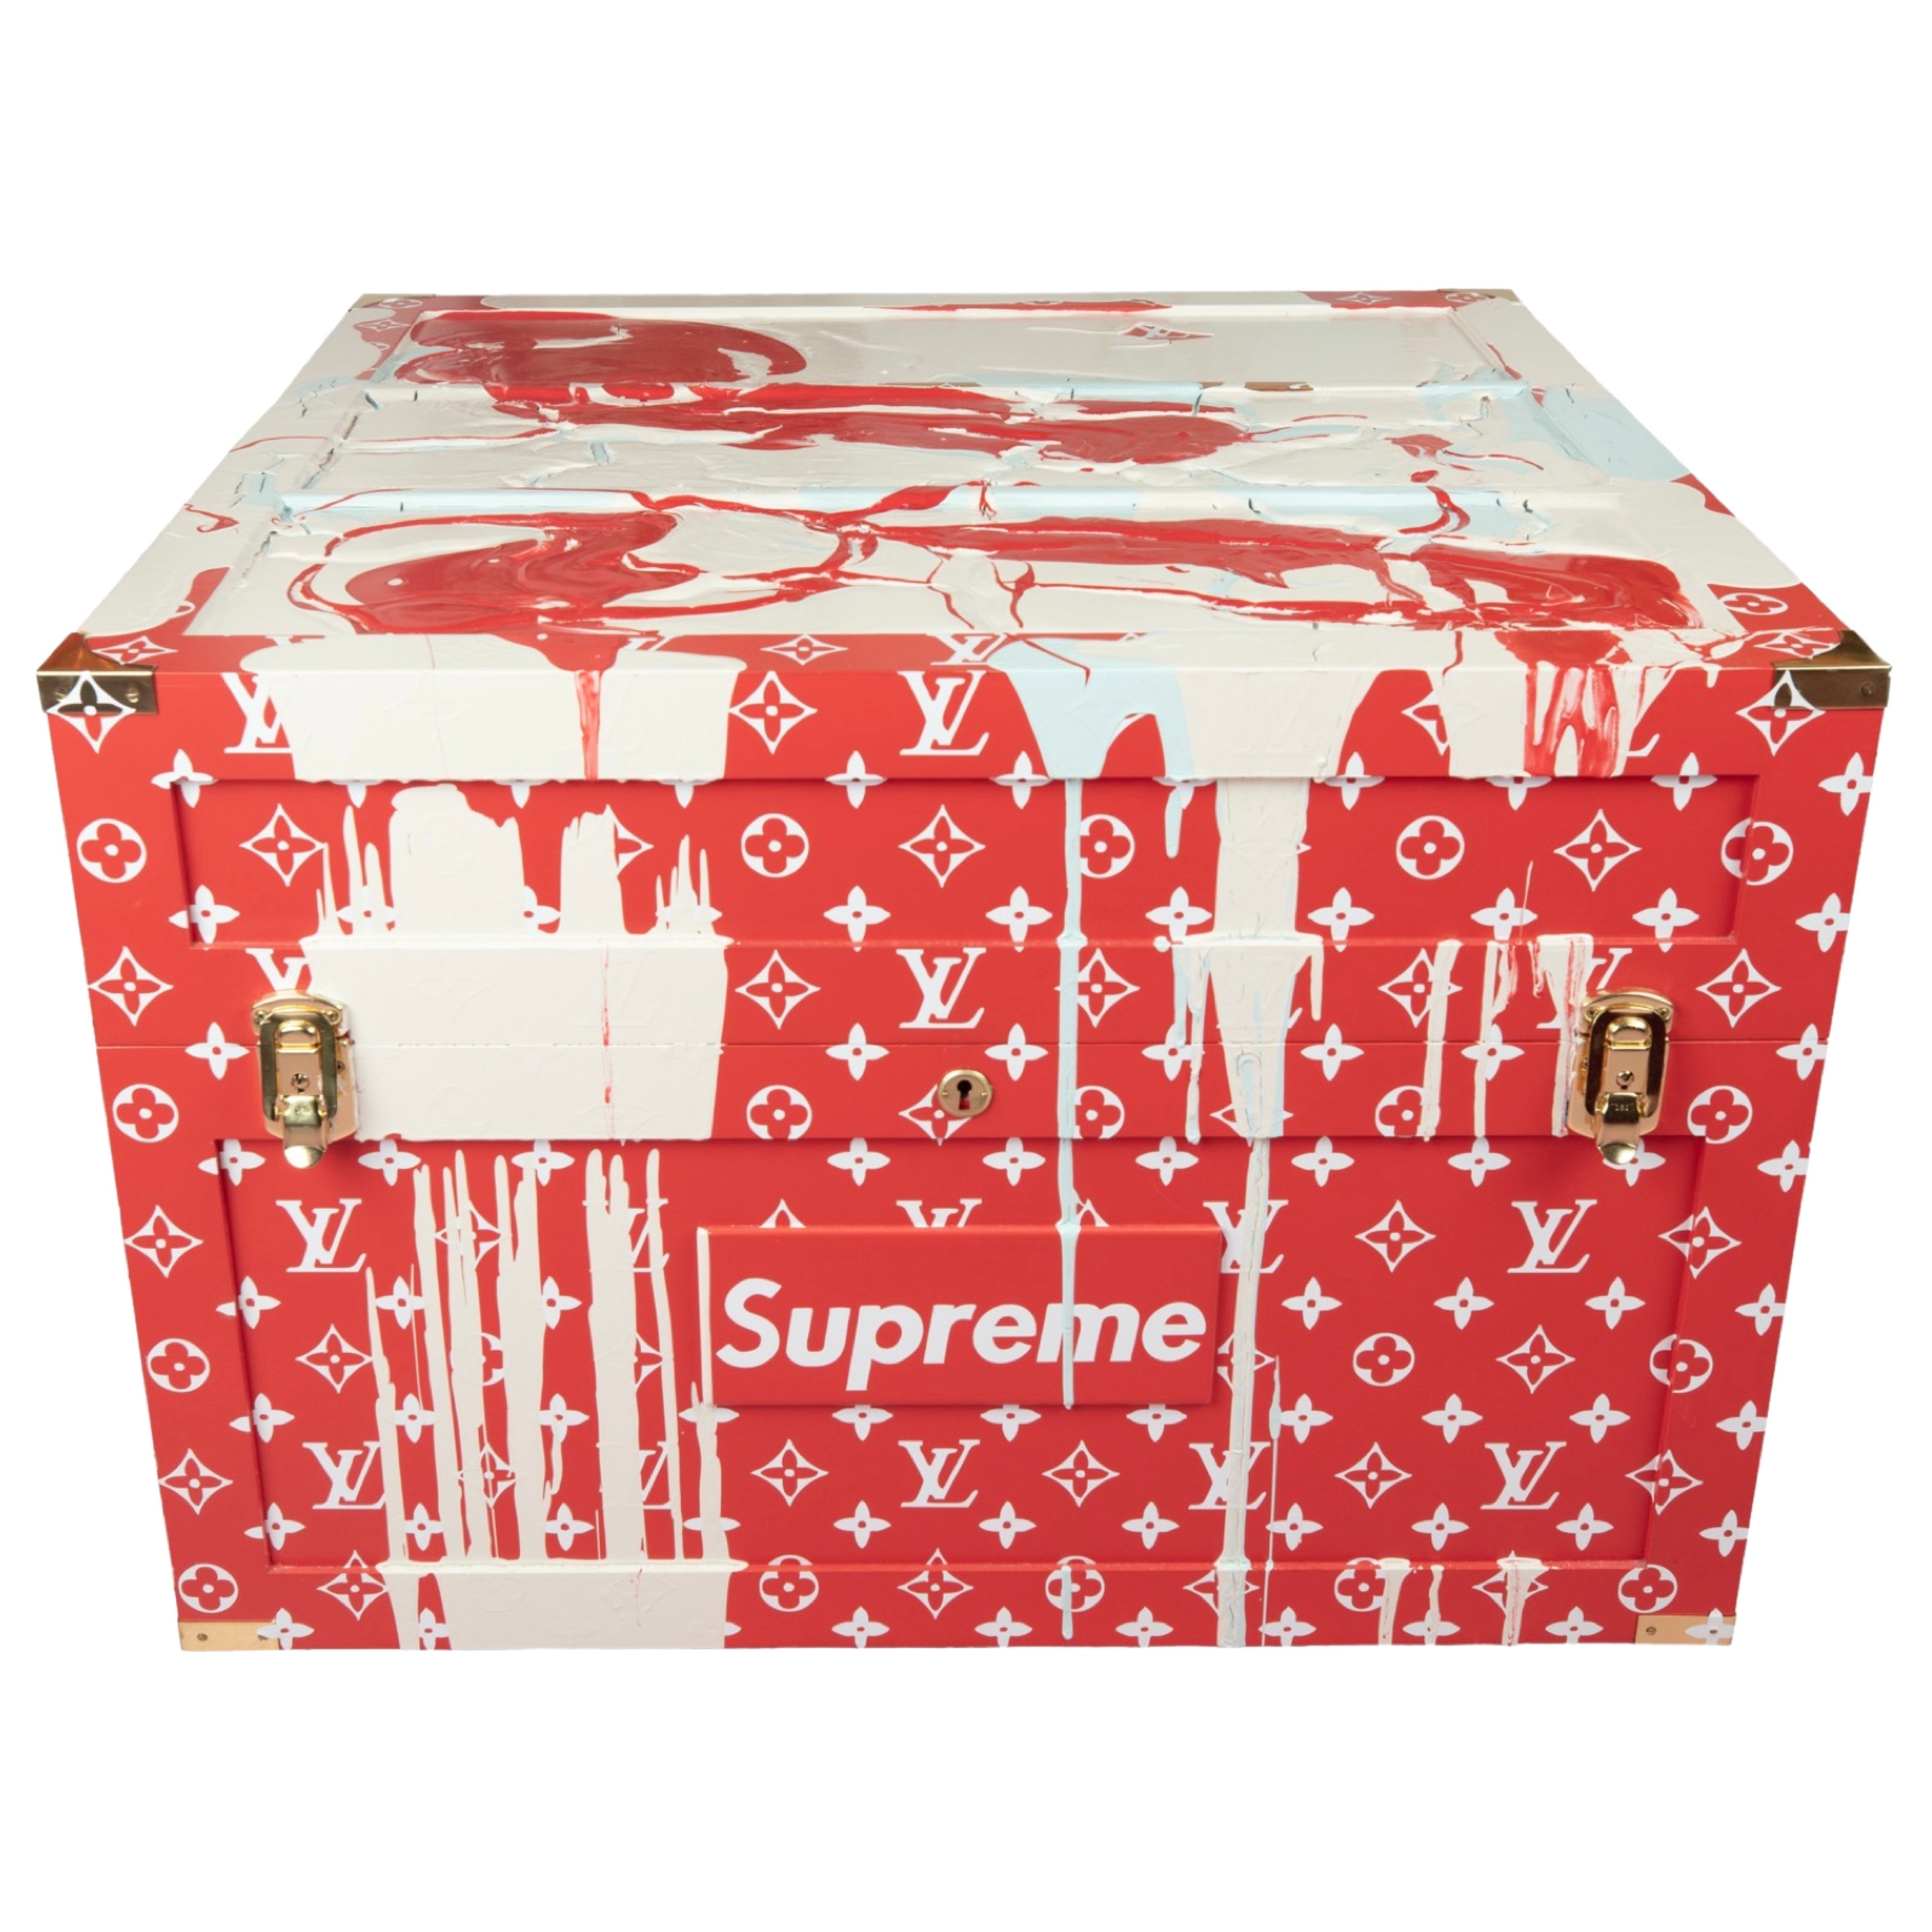 Supreme x Louis Vuitton Deck and Trunk at the Louis Vuitton Exhibition in  NYC  rstreetwear